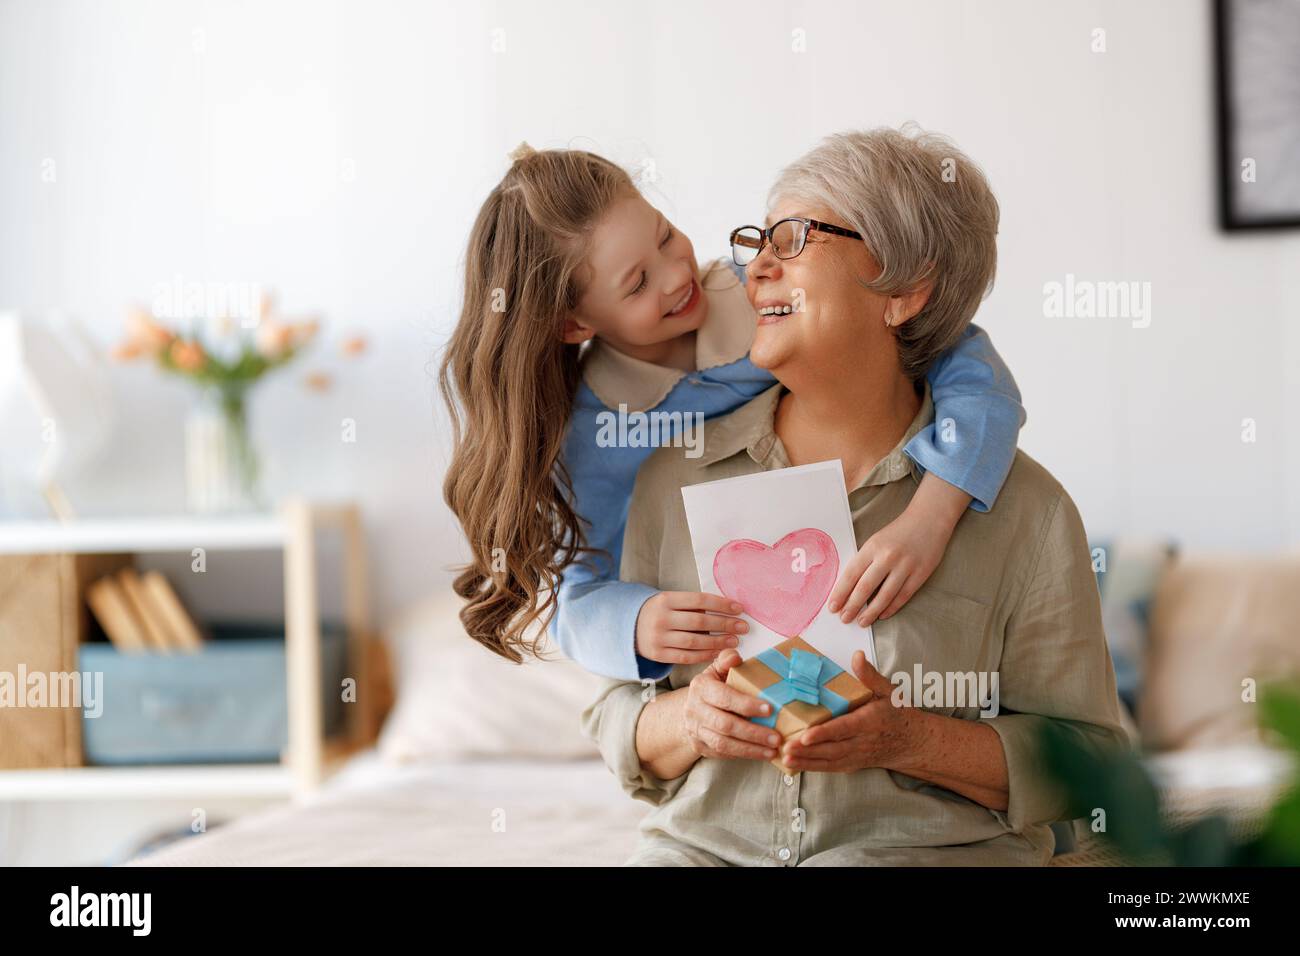 Beautiful cute child congratulating grandmother and giving her postcard. Woman and girl are hugging and laughing. Stock Photo